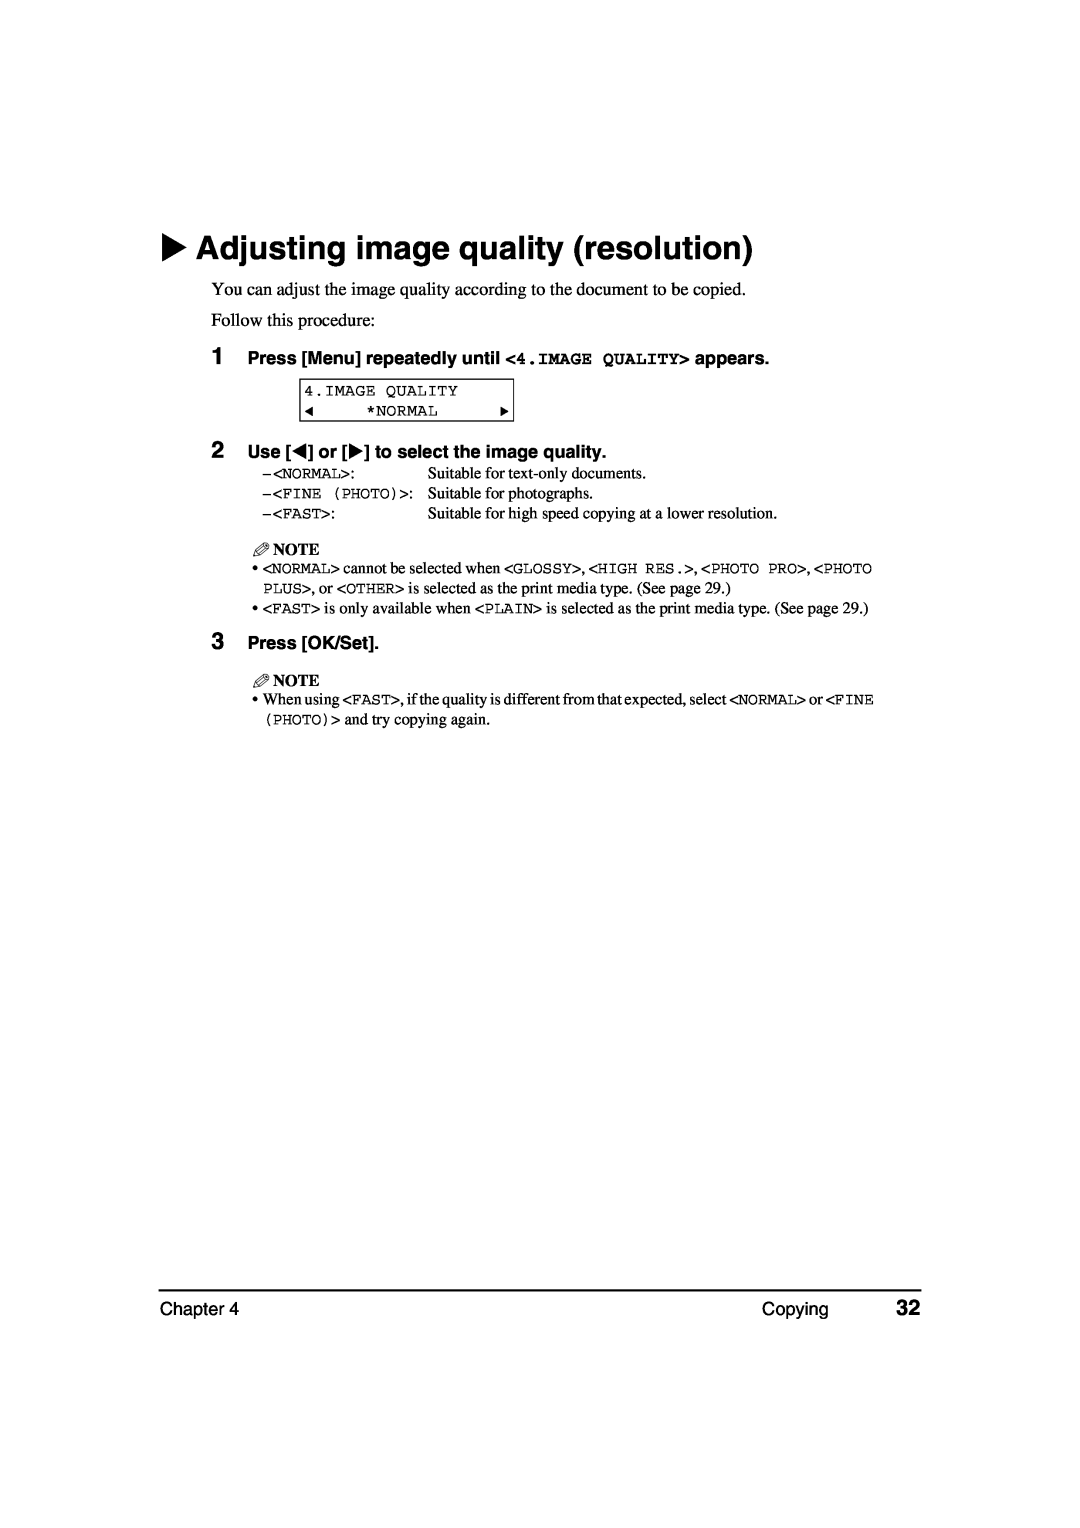 Canon MP360 Adjusting image quality resolution, Press Menu repeatedly until 4.IMAGE QUALITY appears, Press OK/Set, Chapter 